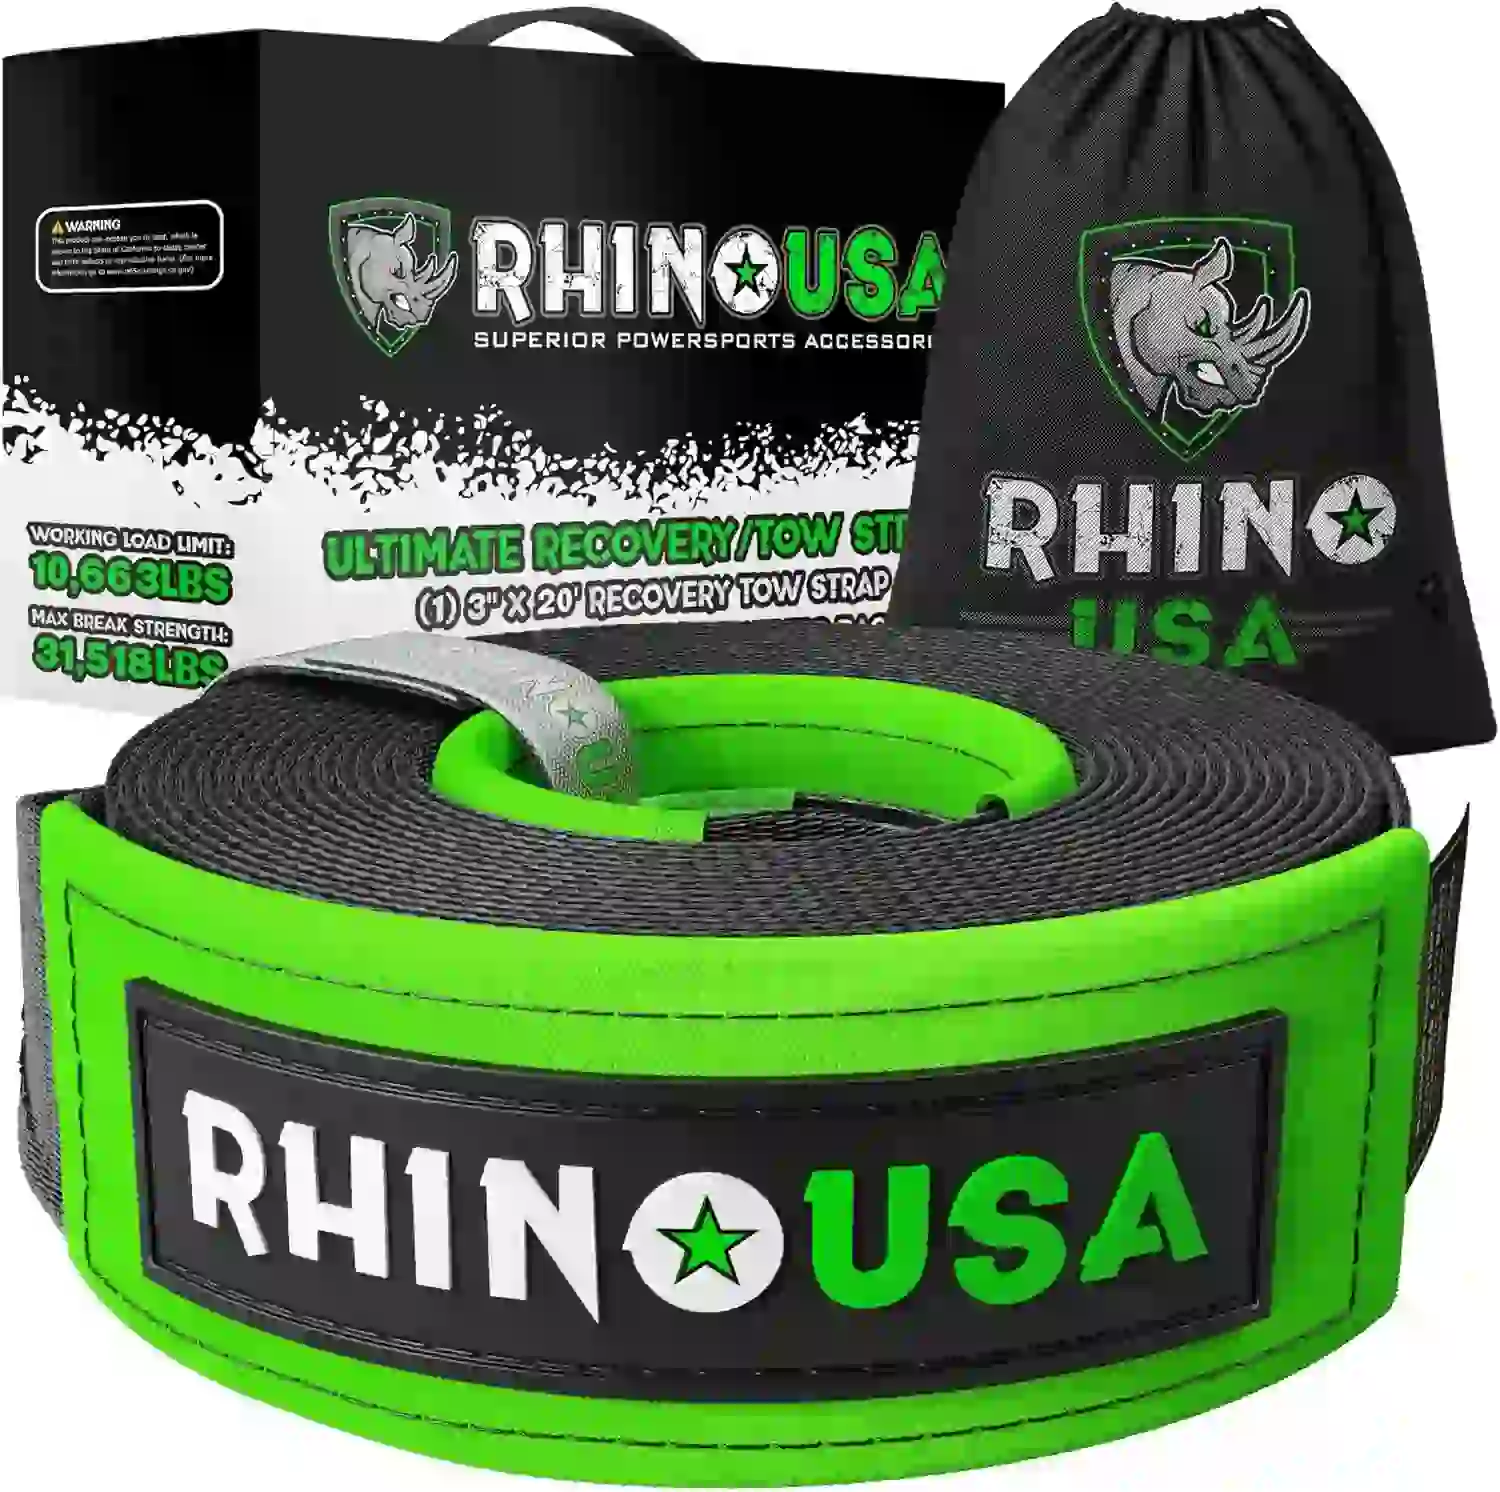 RHINO USA Recovery Tow Strap 3" x 20ft